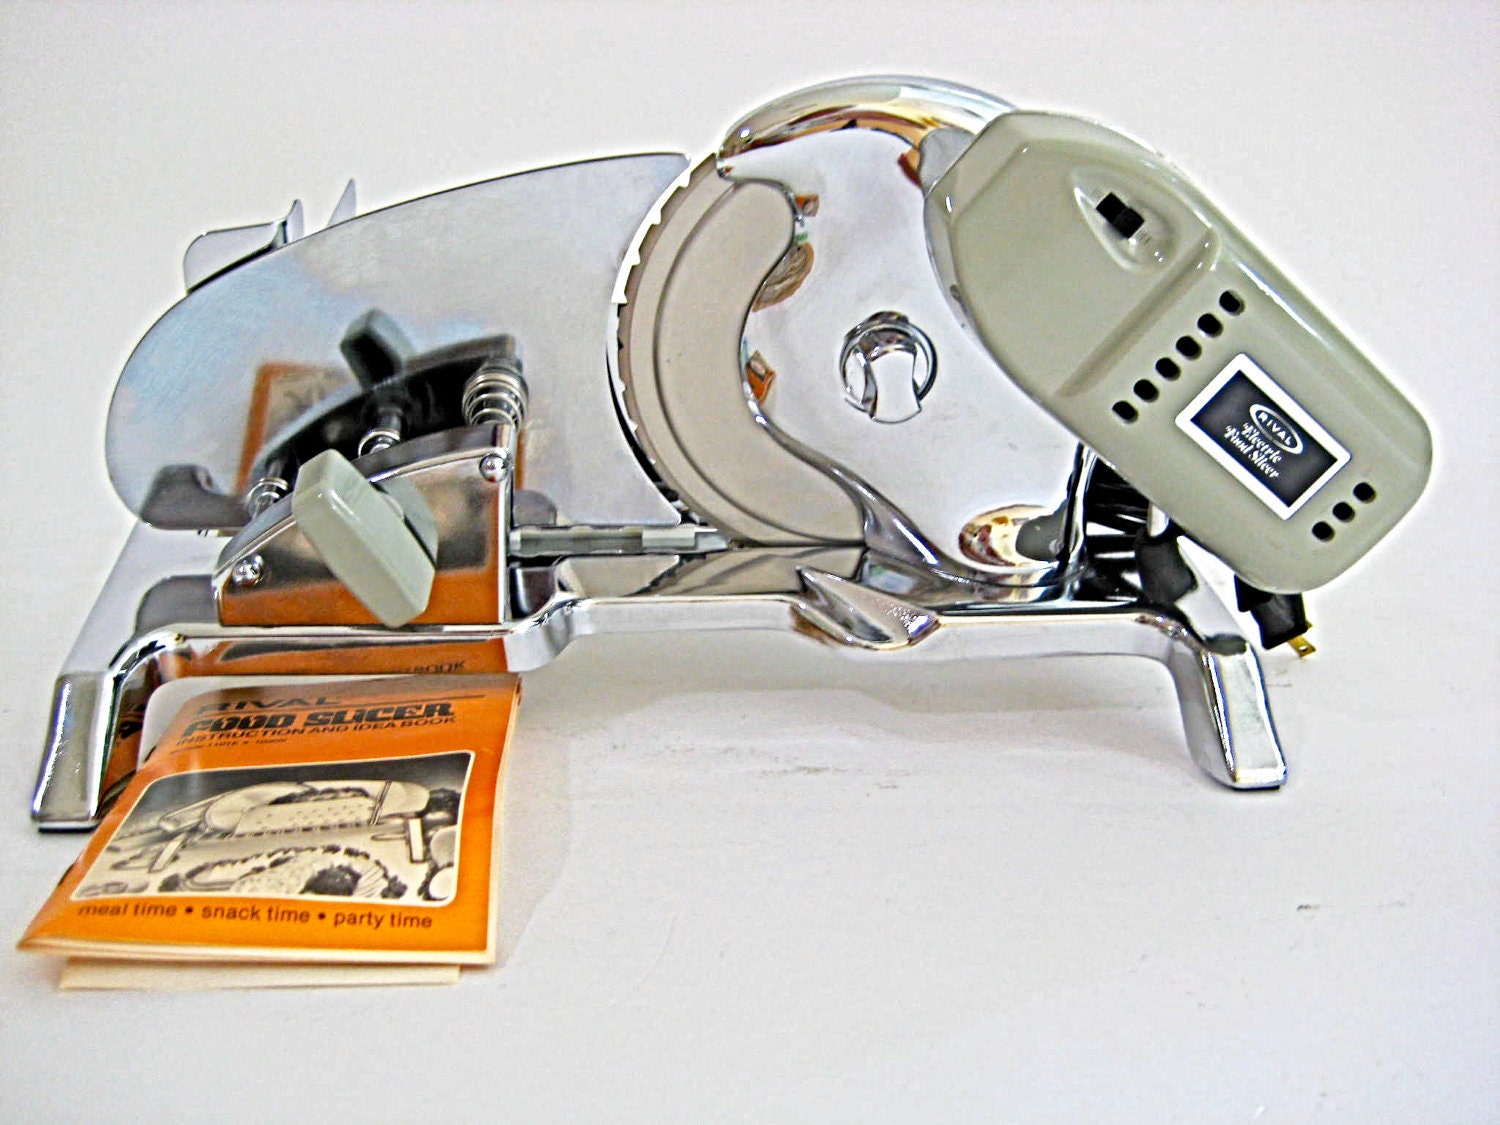 Rival Electric Food Slicer-Like New in box-never by KingOVintage